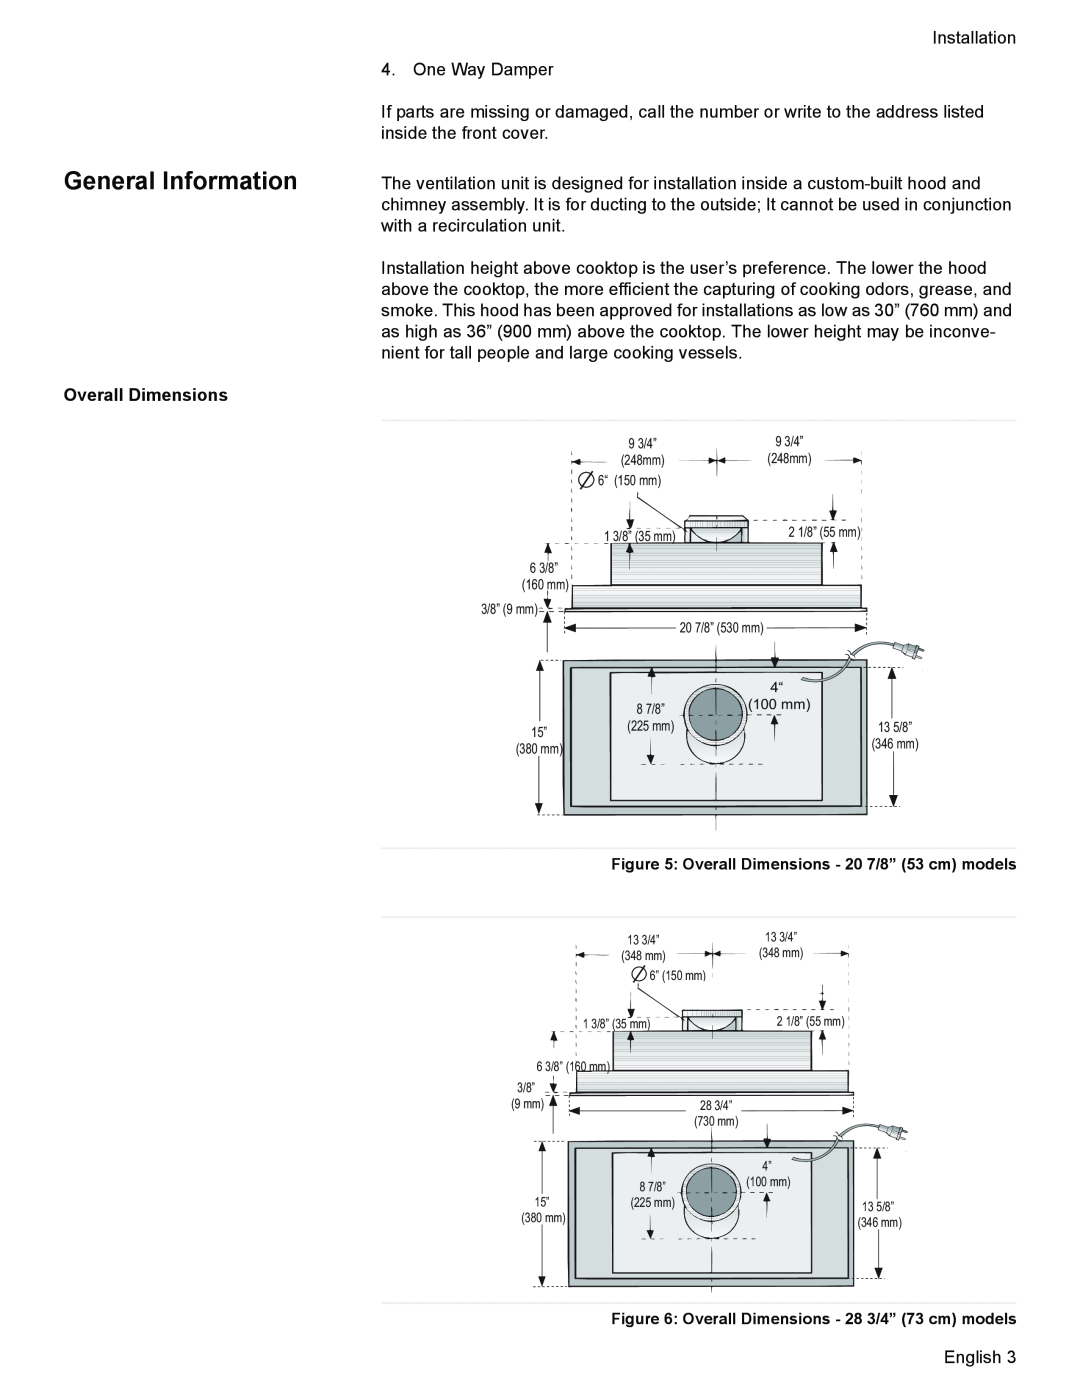 Thermador VCI2 installation manual General Information, Overall Dimensions 